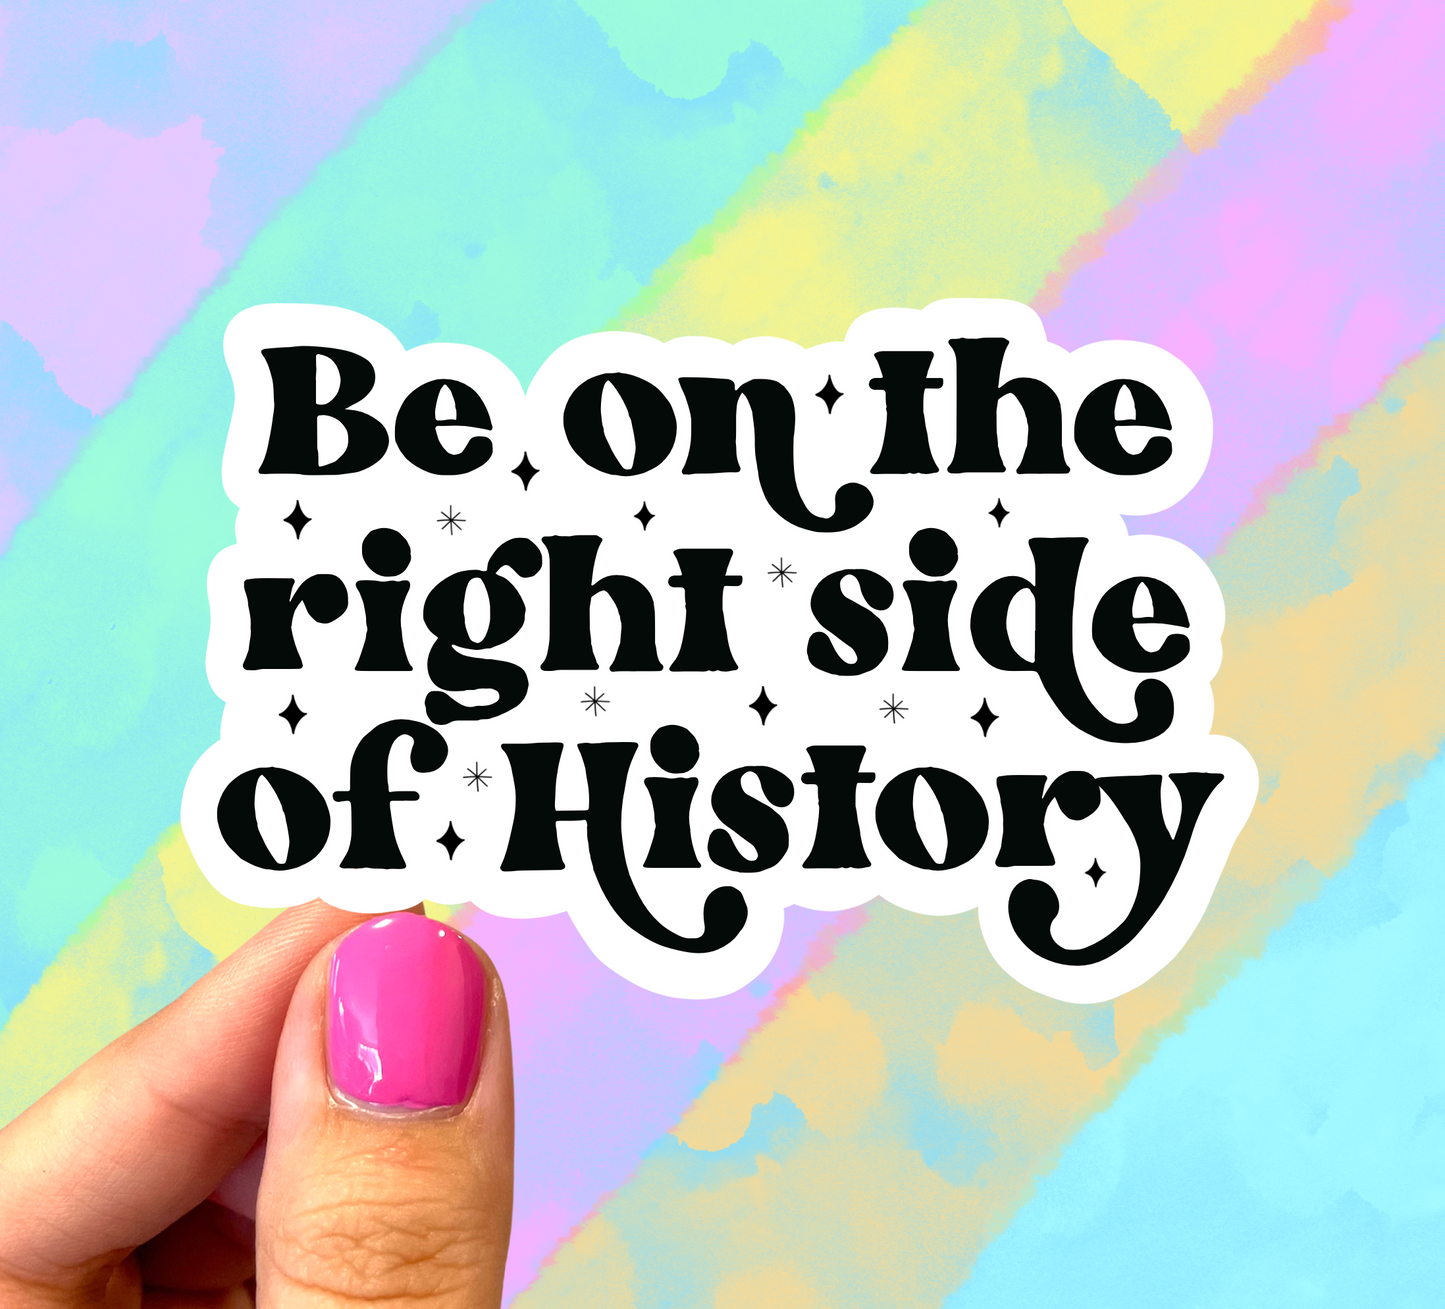 Be on the right side of history